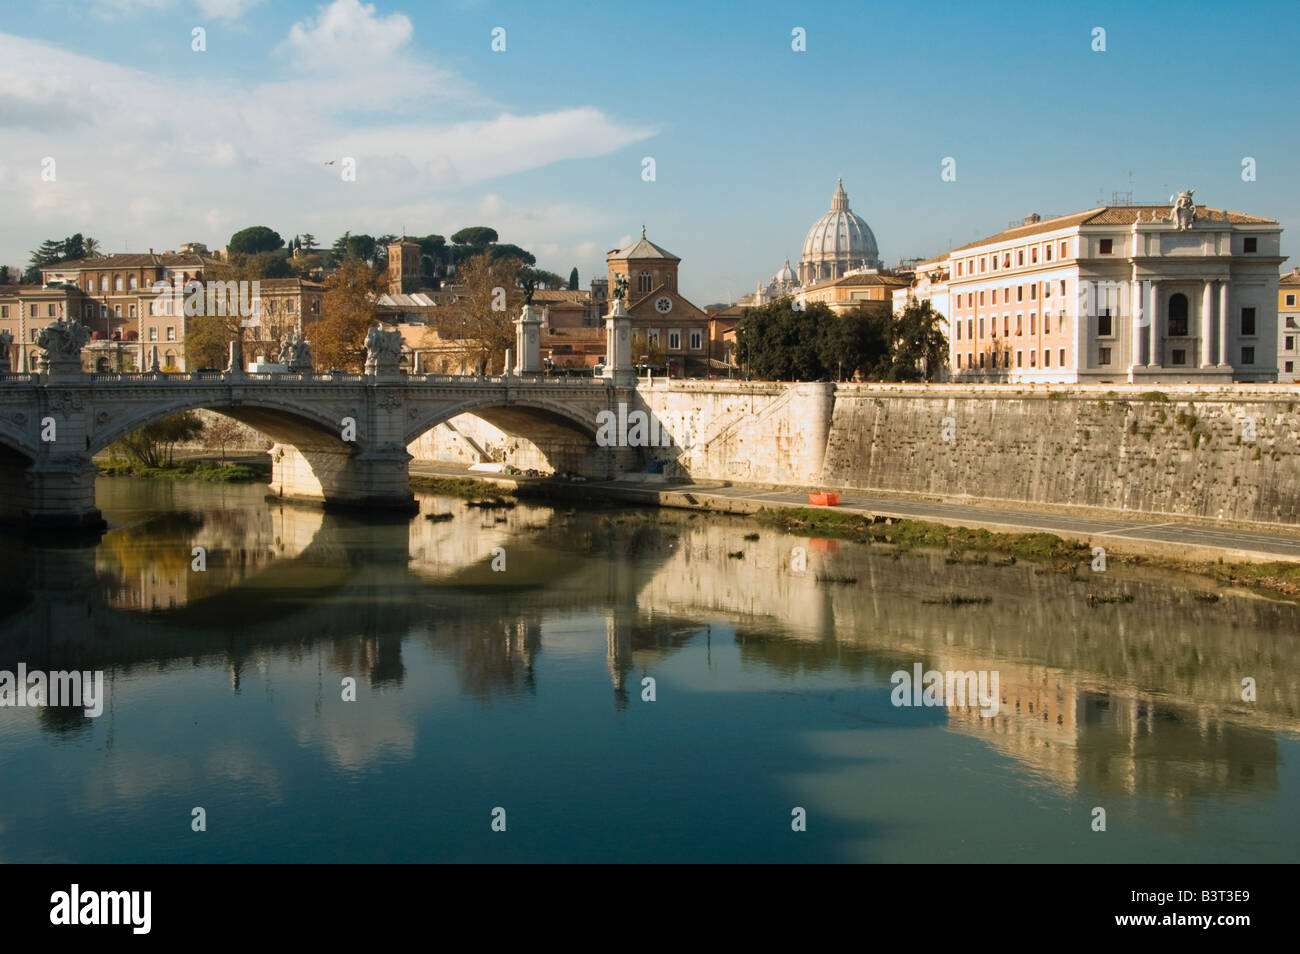 Ponte Vittorio Emanuele over Tiber river with Vatican city in background, Rome Italy Stock Photo